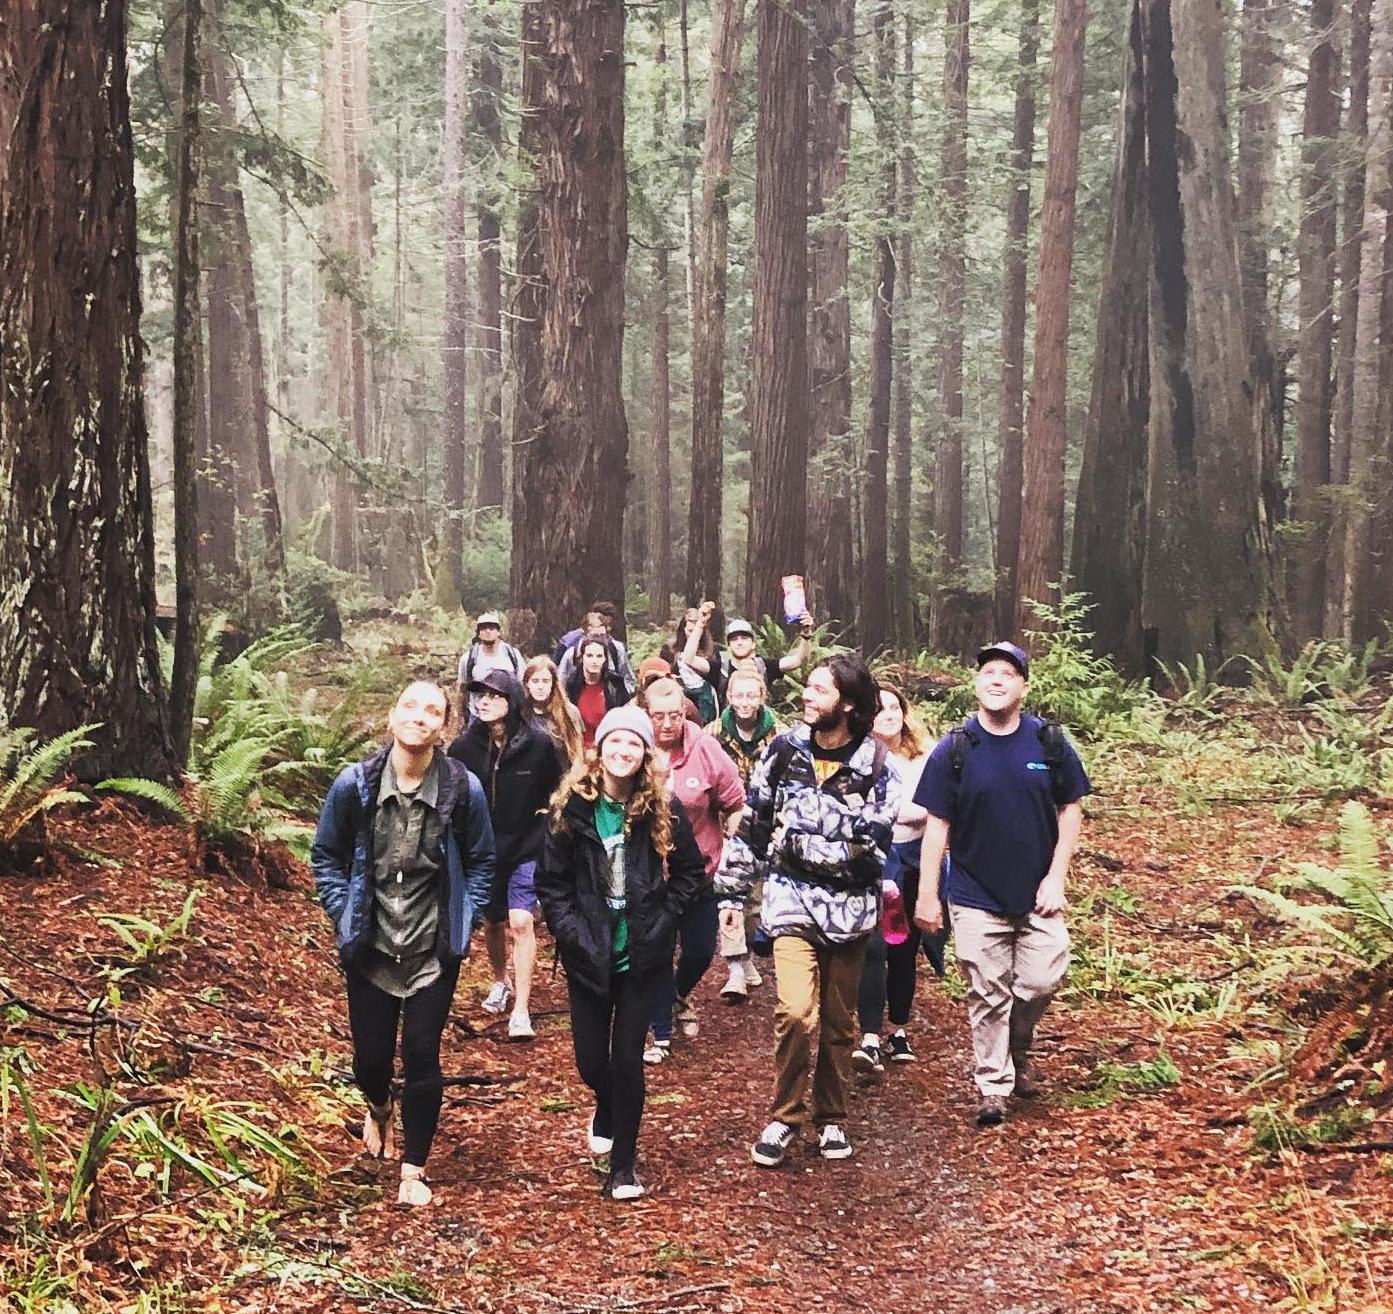 Students taking a hike in the forest